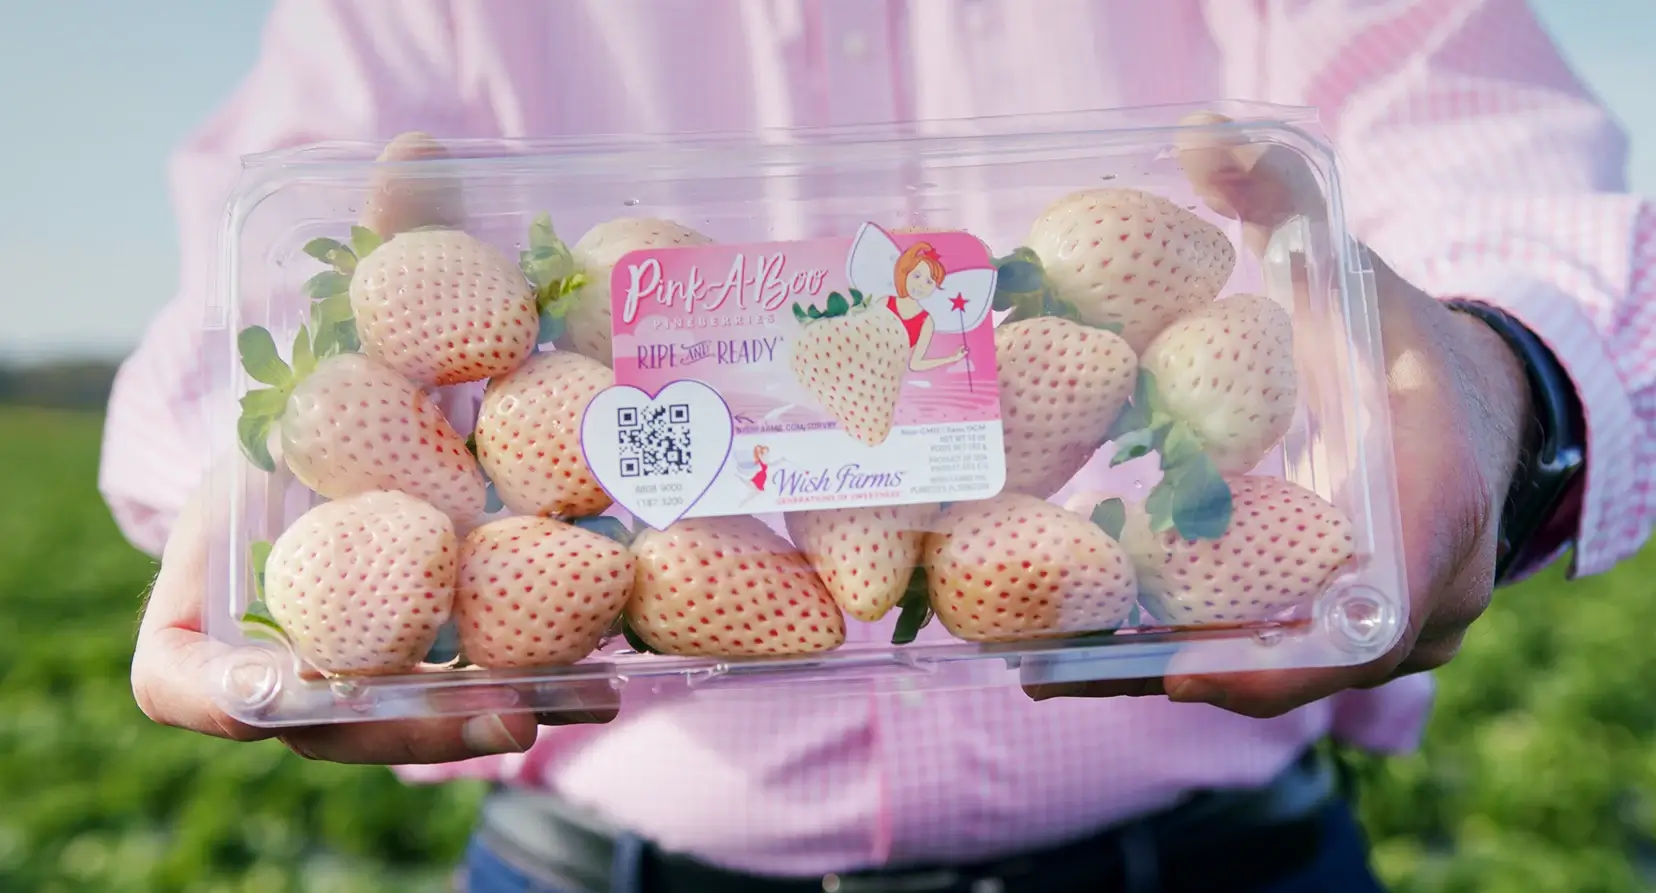 Where To Buy Pink-A-Boo® Pineberries